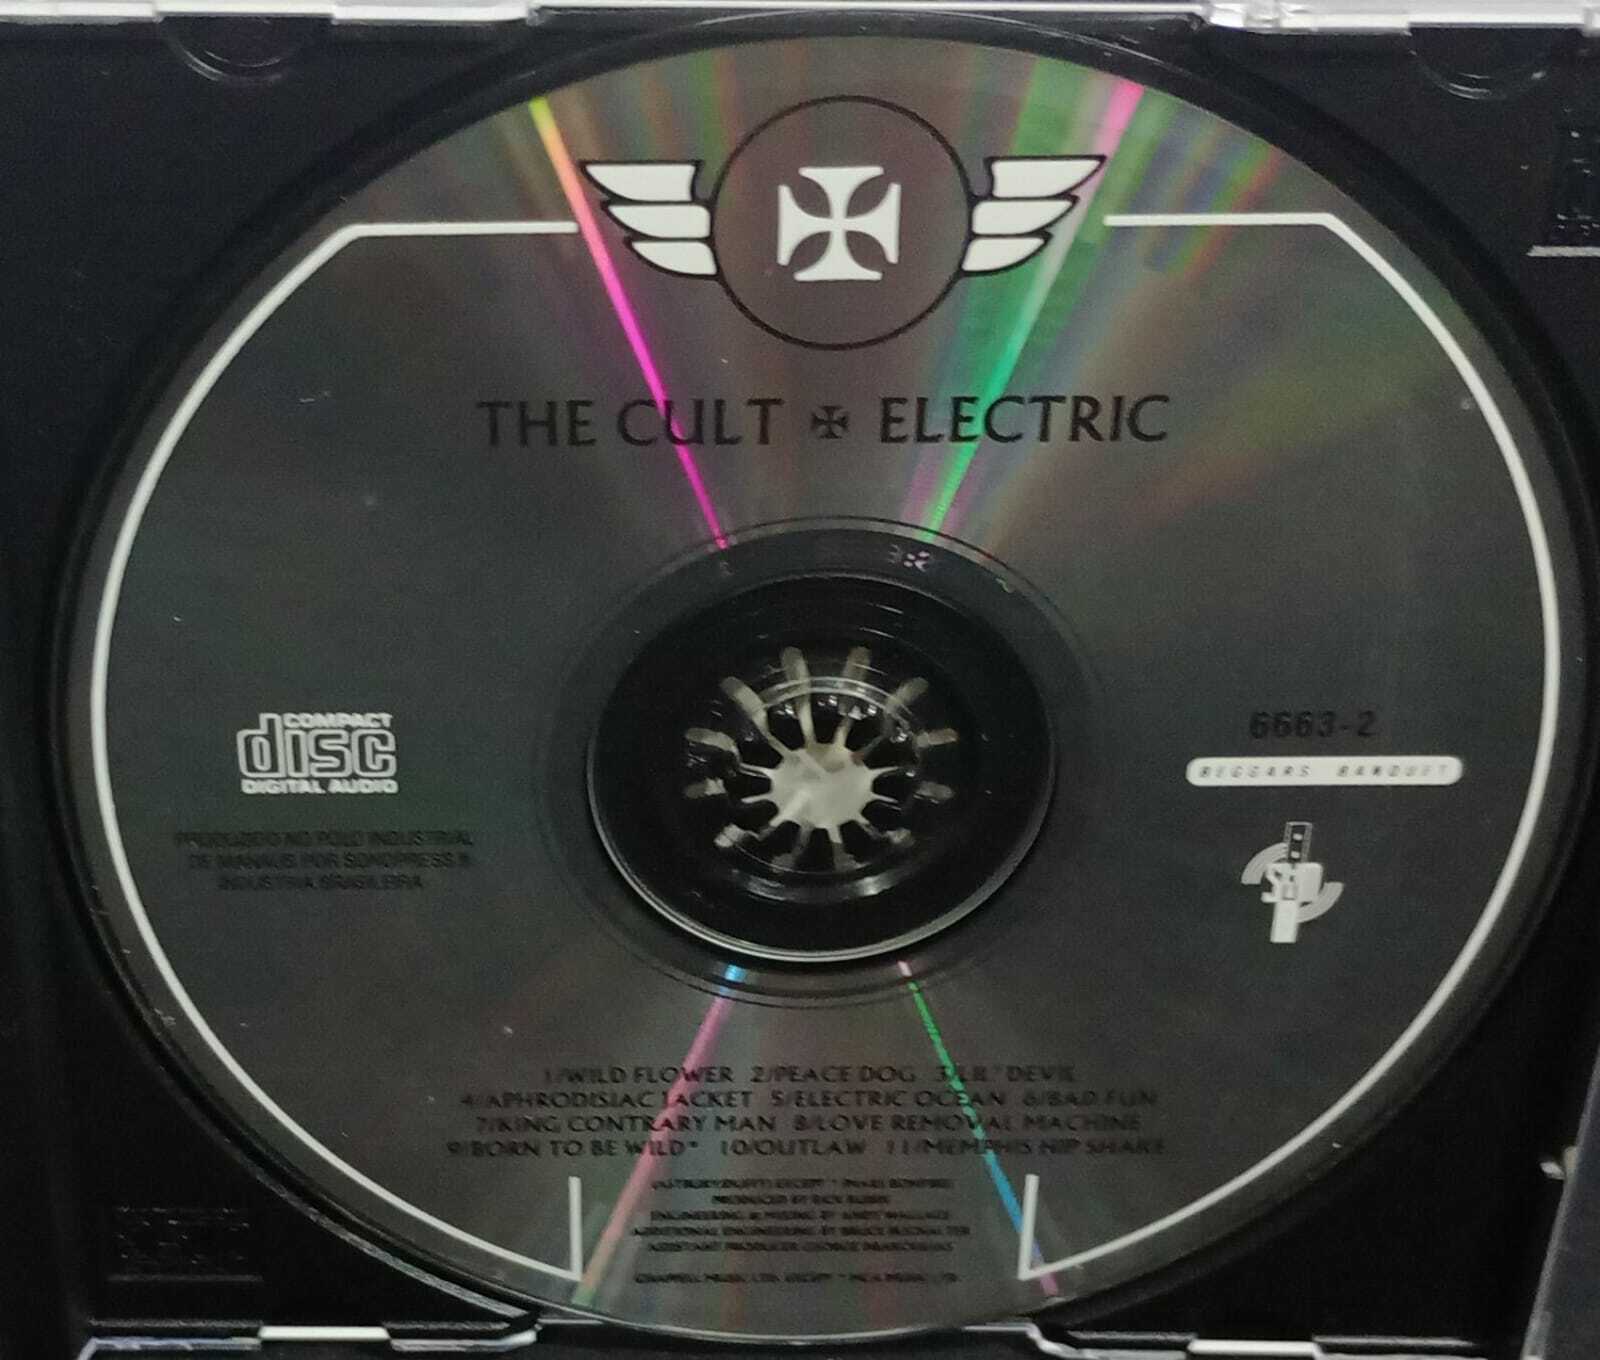 CD - Cult the - Electric